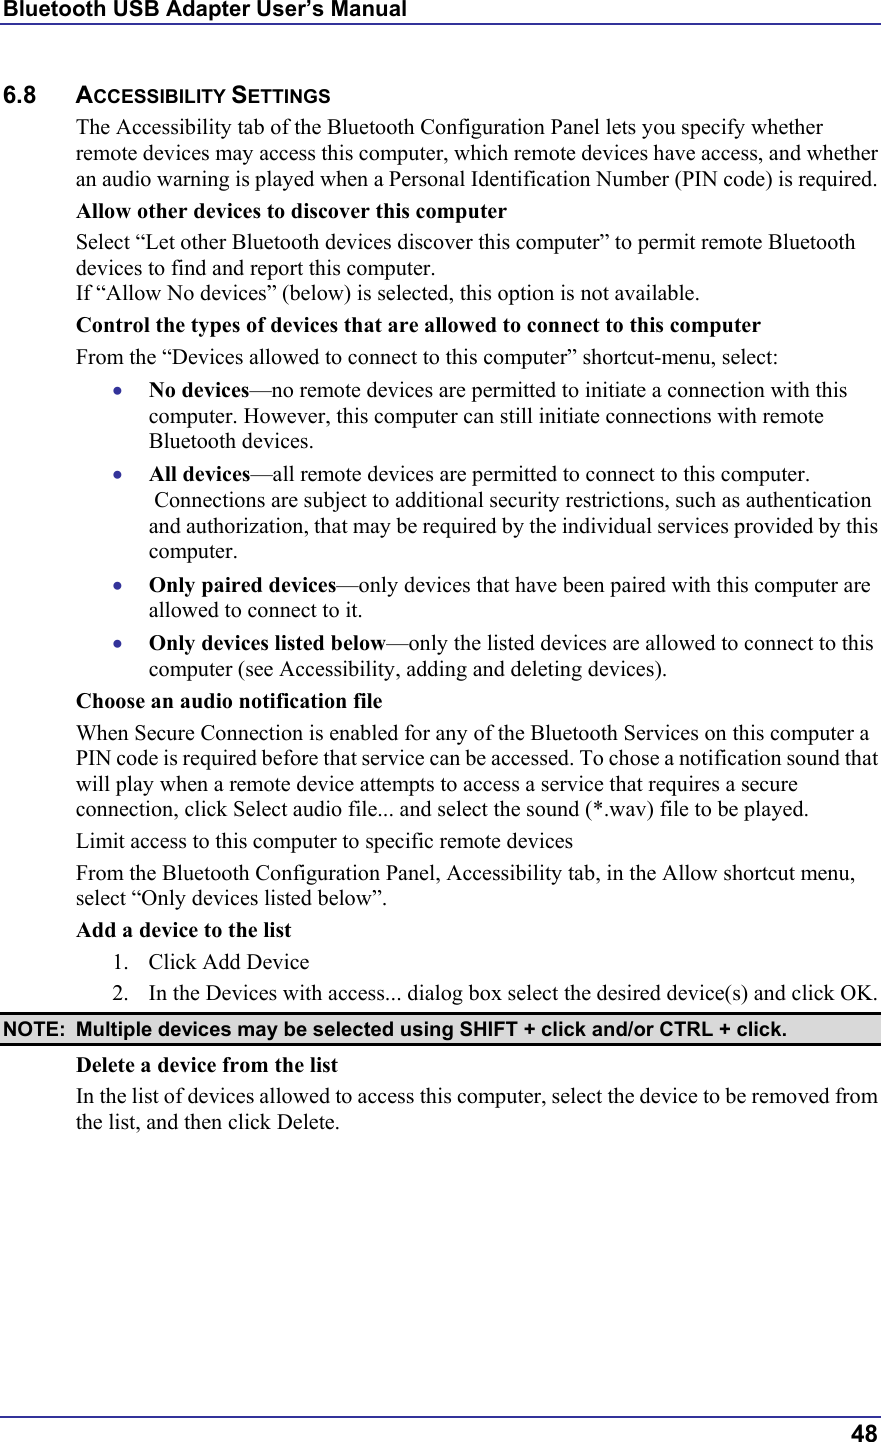 Bluetooth USB Adapter User’s Manual  48 6.8 ACCESSIBILITY SETTINGS The Accessibility tab of the Bluetooth Configuration Panel lets you specify whether remote devices may access this computer, which remote devices have access, and whether an audio warning is played when a Personal Identification Number (PIN code) is required. Allow other devices to discover this computer Select “Let other Bluetooth devices discover this computer” to permit remote Bluetooth devices to find and report this computer. If “Allow No devices” (below) is selected, this option is not available. Control the types of devices that are allowed to connect to this computer From the “Devices allowed to connect to this computer” shortcut-menu, select: •  No devices—no remote devices are permitted to initiate a connection with this computer. However, this computer can still initiate connections with remote Bluetooth devices. •  All devices—all remote devices are permitted to connect to this computer.  Connections are subject to additional security restrictions, such as authentication and authorization, that may be required by the individual services provided by this computer. •  Only paired devices—only devices that have been paired with this computer are allowed to connect to it. •  Only devices listed below—only the listed devices are allowed to connect to this computer (see Accessibility, adding and deleting devices). Choose an audio notification file When Secure Connection is enabled for any of the Bluetooth Services on this computer a PIN code is required before that service can be accessed. To chose a notification sound that will play when a remote device attempts to access a service that requires a secure connection, click Select audio file... and select the sound (*.wav) file to be played. Limit access to this computer to specific remote devices From the Bluetooth Configuration Panel, Accessibility tab, in the Allow shortcut menu, select “Only devices listed below”. Add a device to the list 1.  Click Add Device 2.  In the Devices with access... dialog box select the desired device(s) and click OK.  NOTE:  Multiple devices may be selected using SHIFT + click and/or CTRL + click. Delete a device from the list In the list of devices allowed to access this computer, select the device to be removed from the list, and then click Delete.  